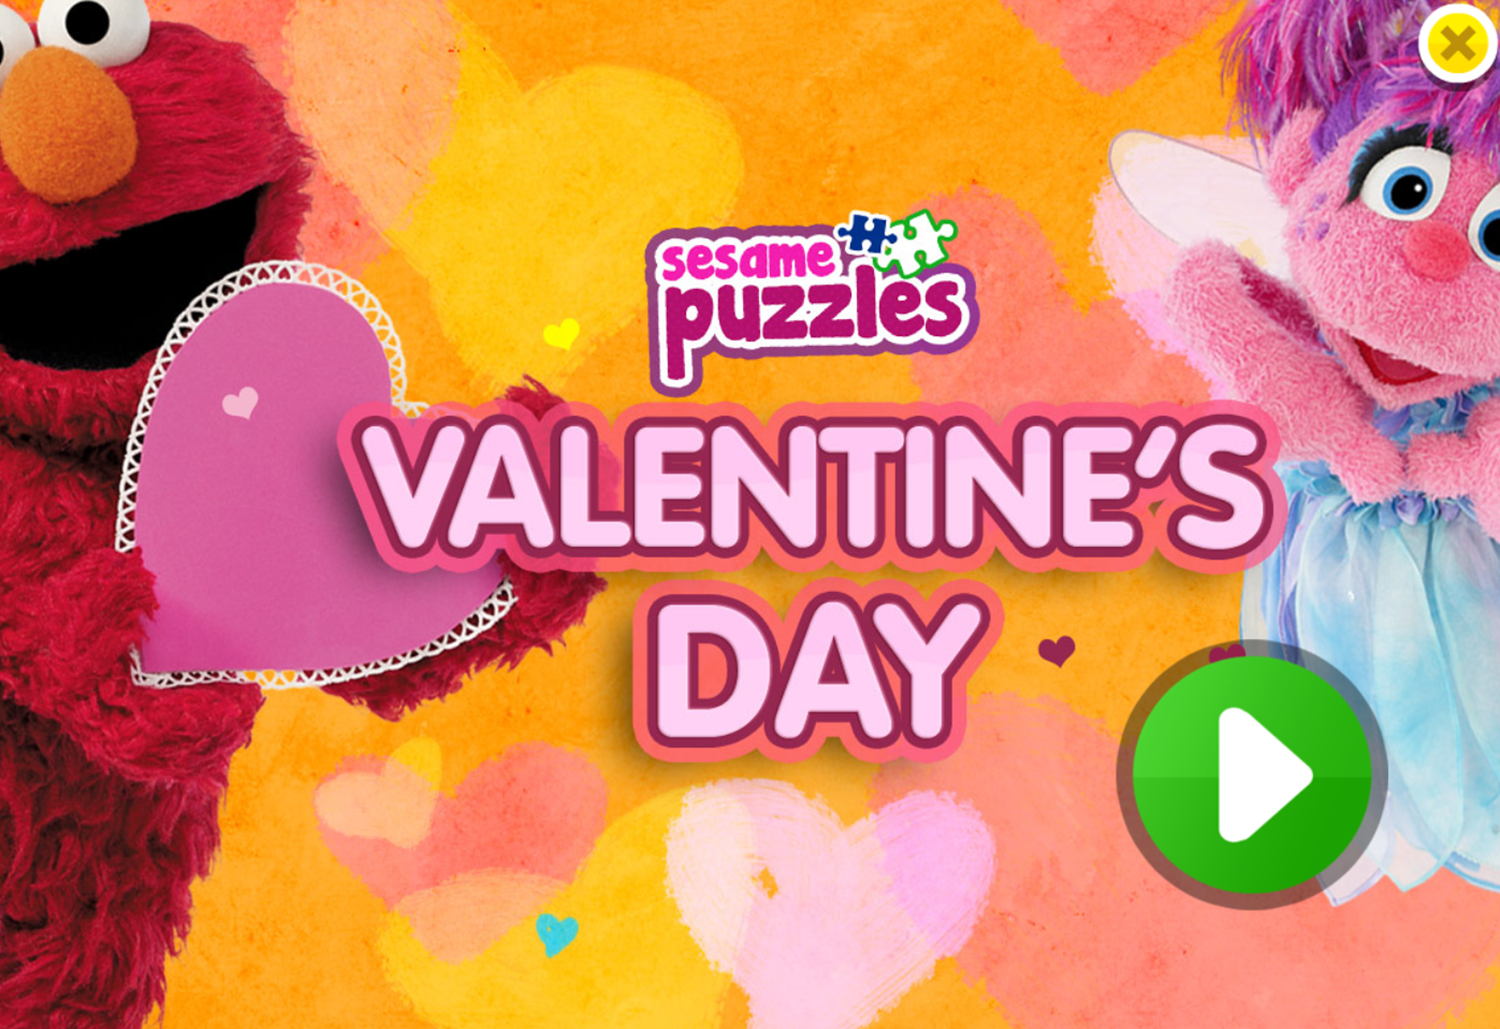 Sesame Street Sesame Puzzles Valentine's Day Game Welcome Screen Screenshot.